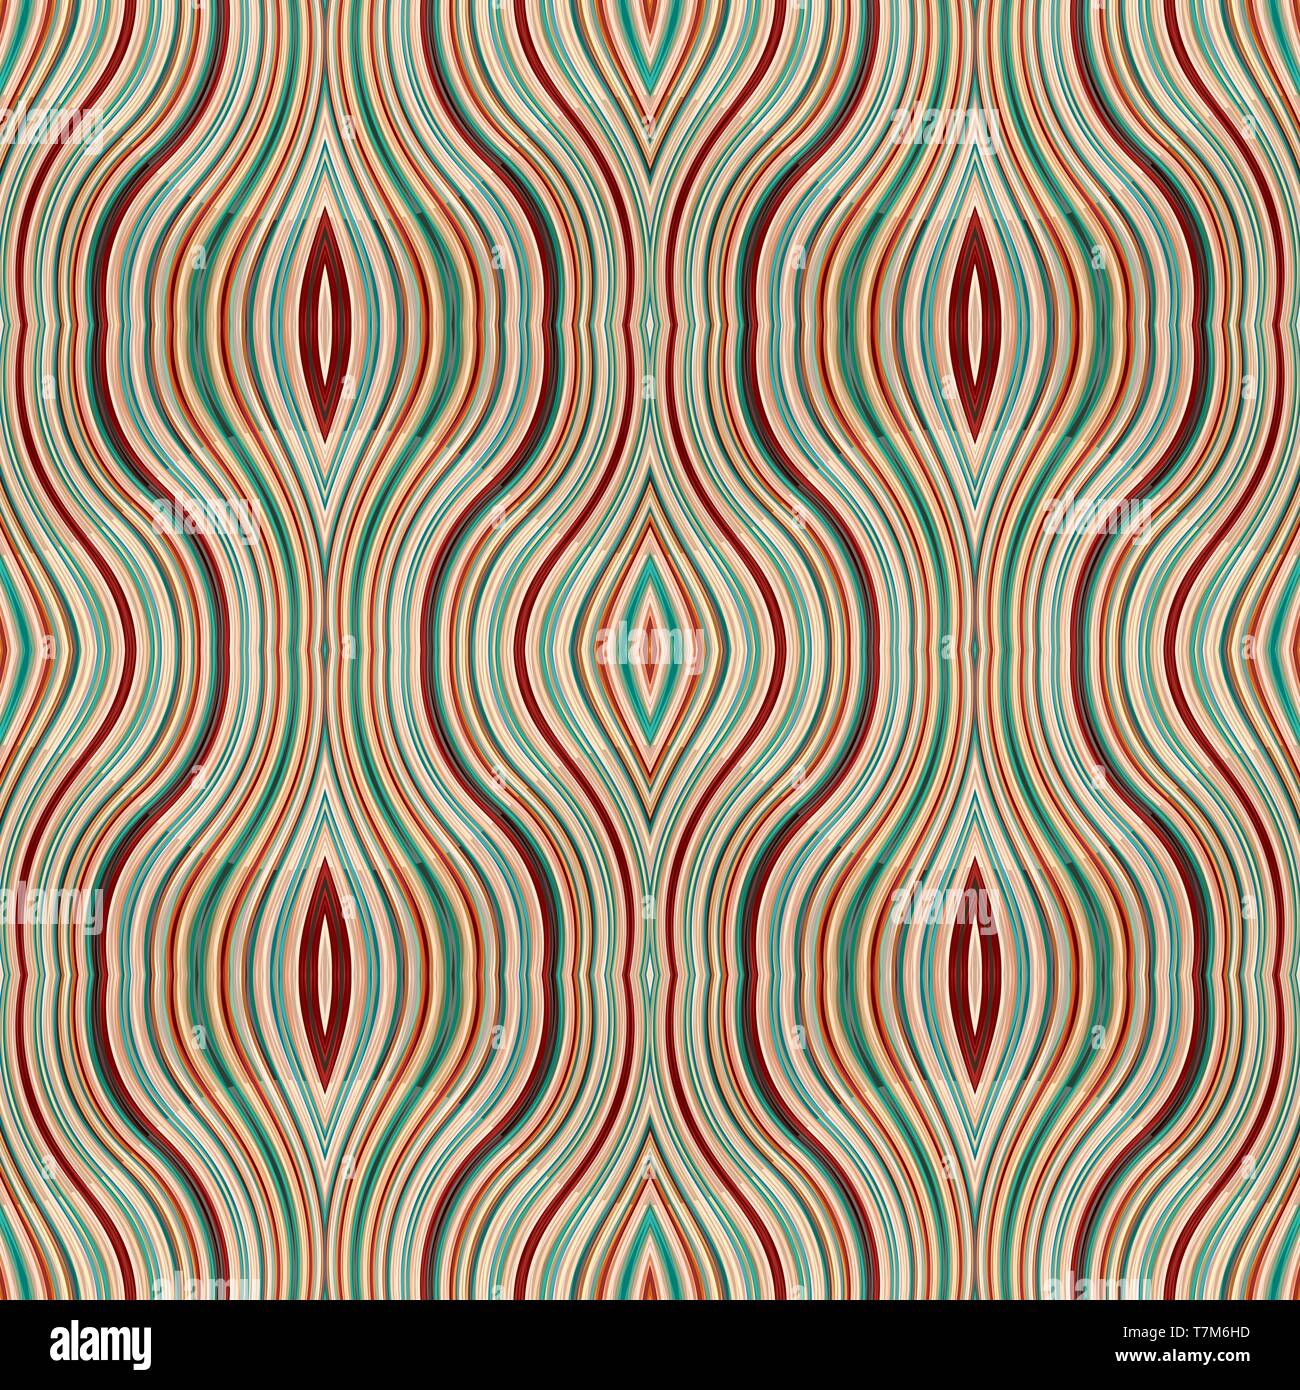 https://c8.alamy.com/comp/T7M6HD/modern-curvy-antique-tan-teal-blue-and-dark-red-color-background-seamless-pattern-can-be-used-for-fabric-texture-decorative-or-wallpaper-design-T7M6HD.jpg